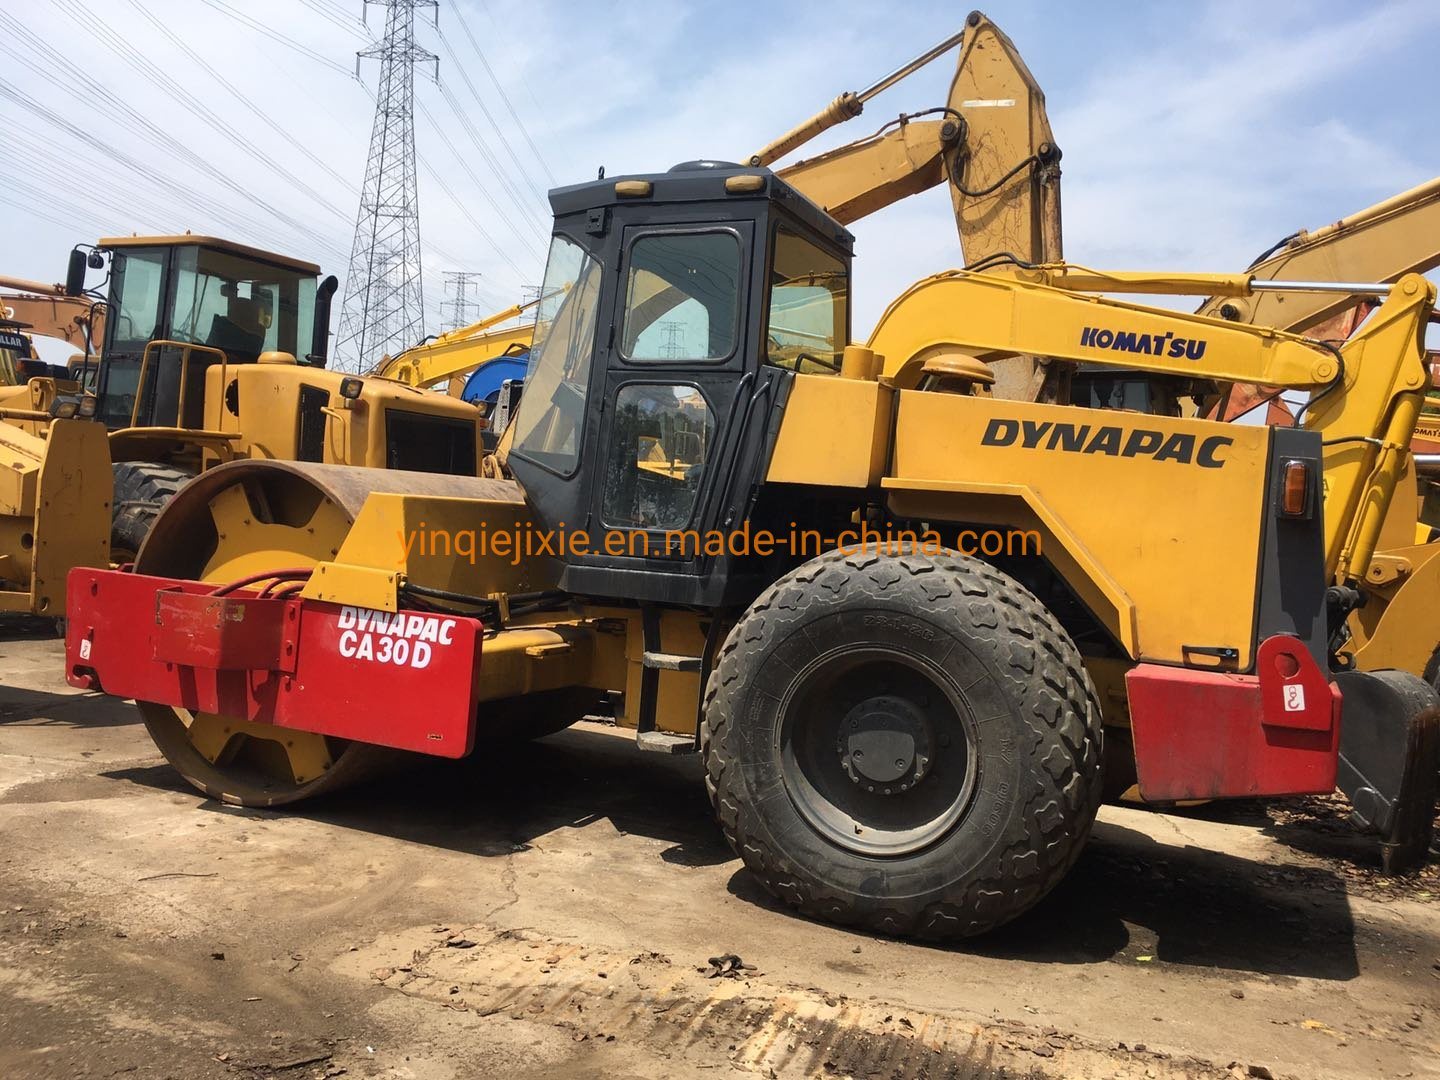 Used Road Roller Vibratory Roller Dynapac Ca30, Ca25, Cc211, Ingersollrand SD100 Roller with Cummins Engine